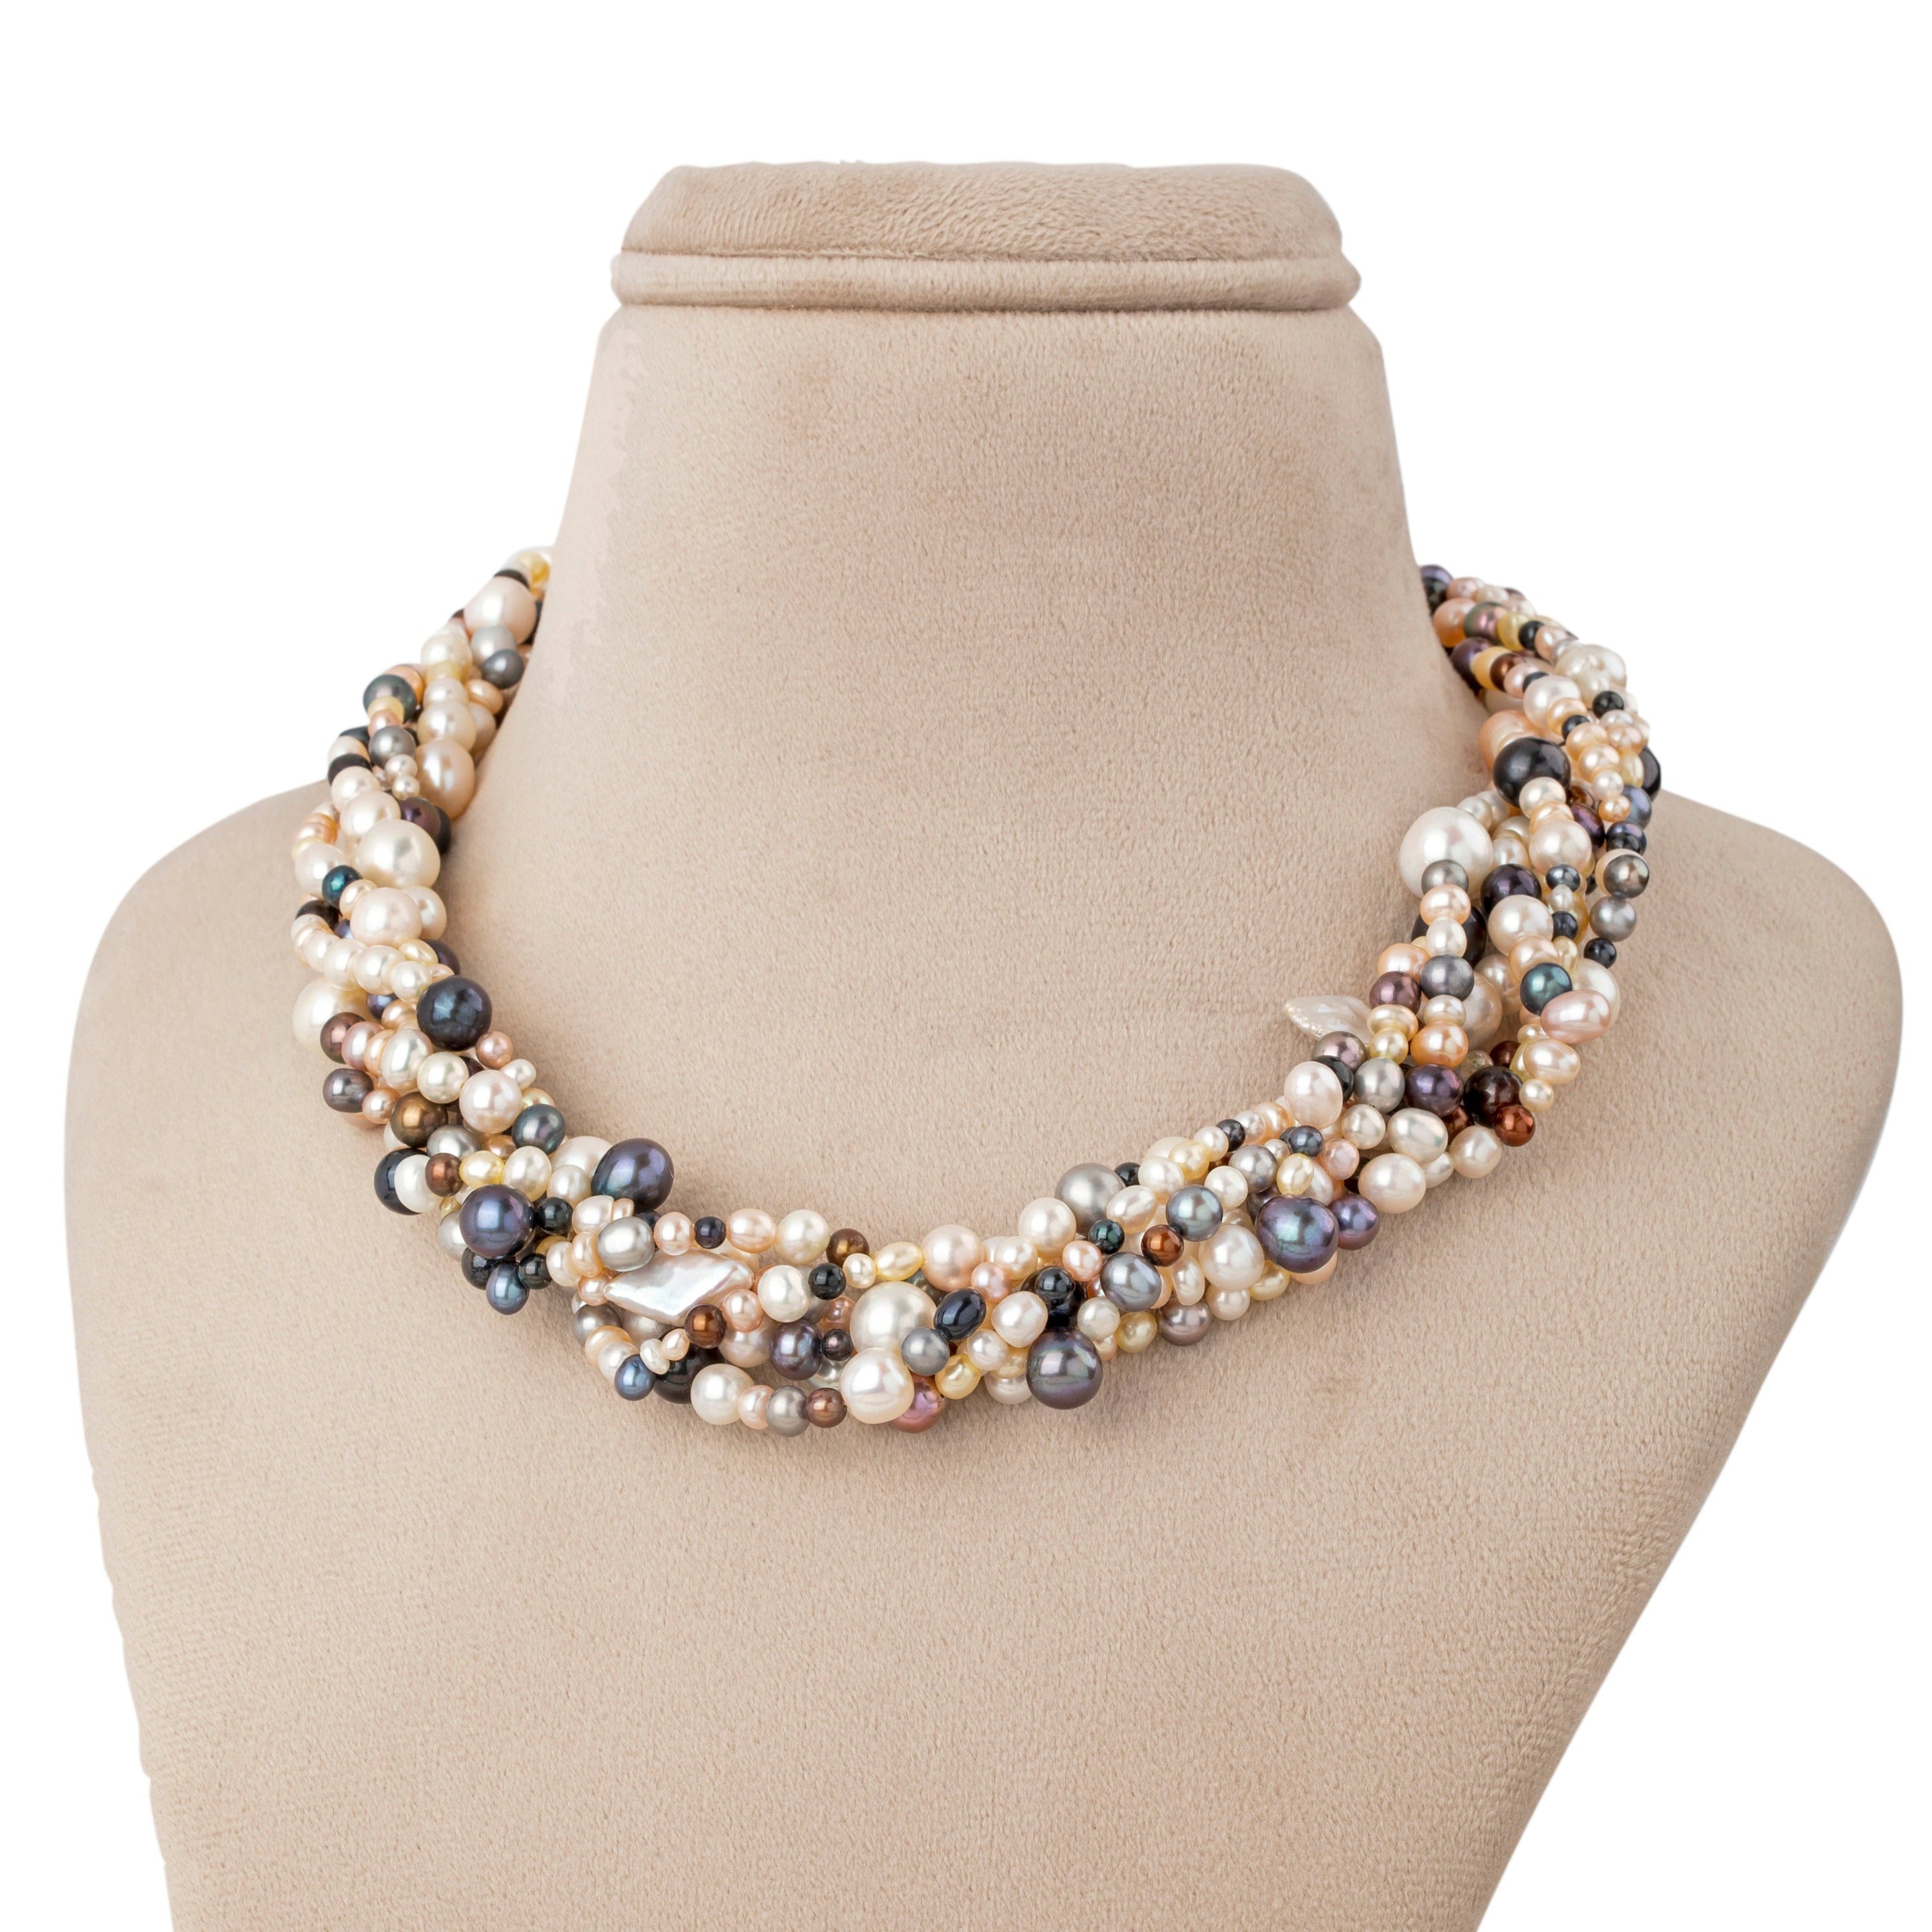 TRIPLE STRAND CREAM FRESHWATER PEARL NECKLACE OPERA LENGTH 30 IN |  Angelucci Jewelry